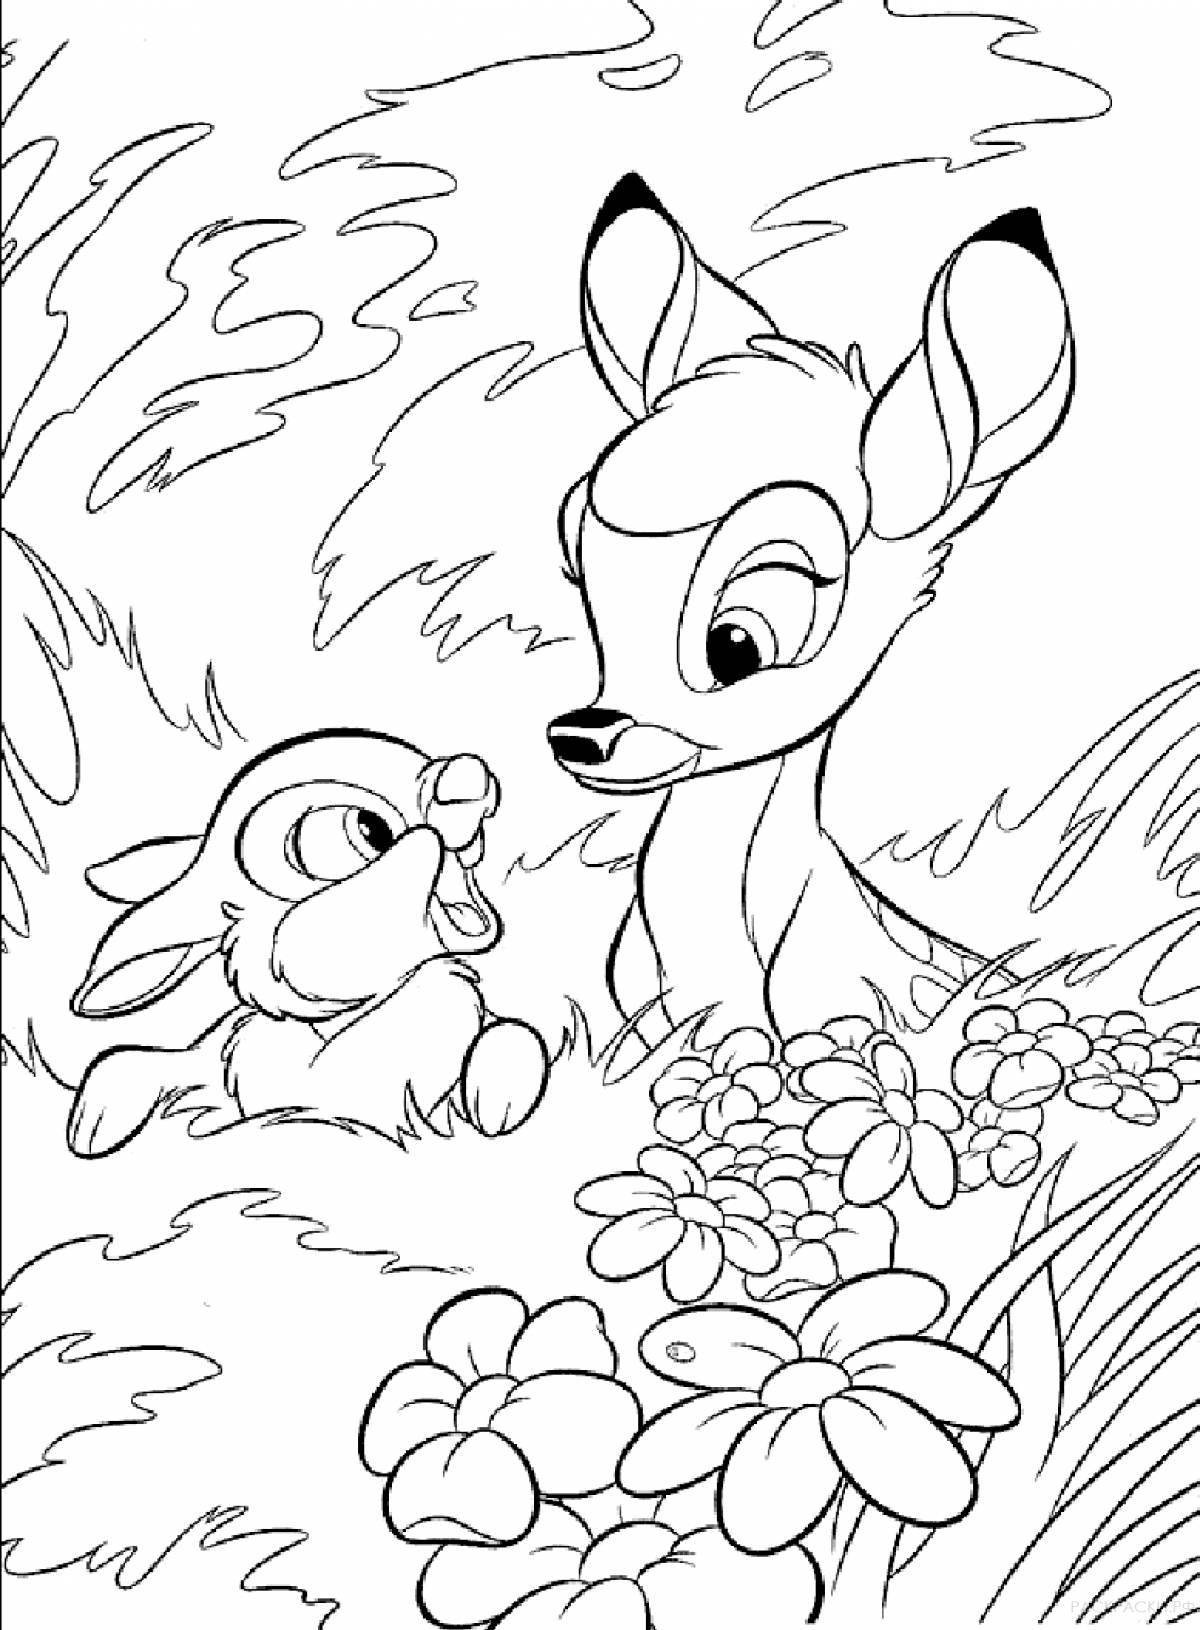 Attractive coloring pages coloring pages